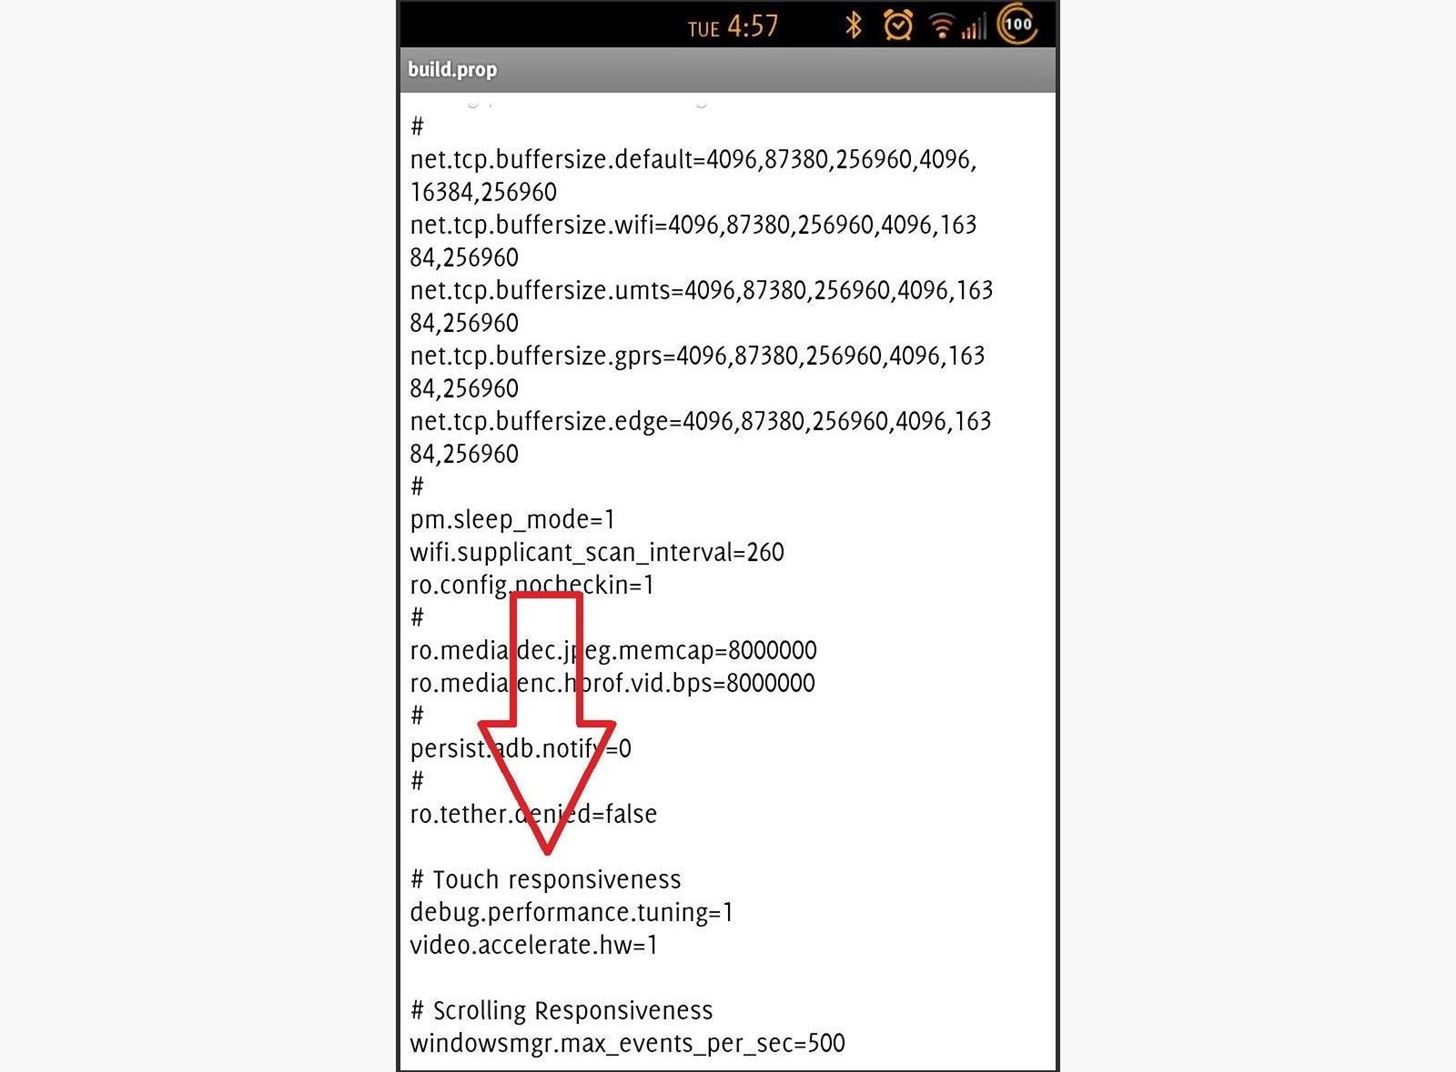 How to Tweak Your Samsung Galaxy S3's Performance with These "Build.prop" Android Hacks